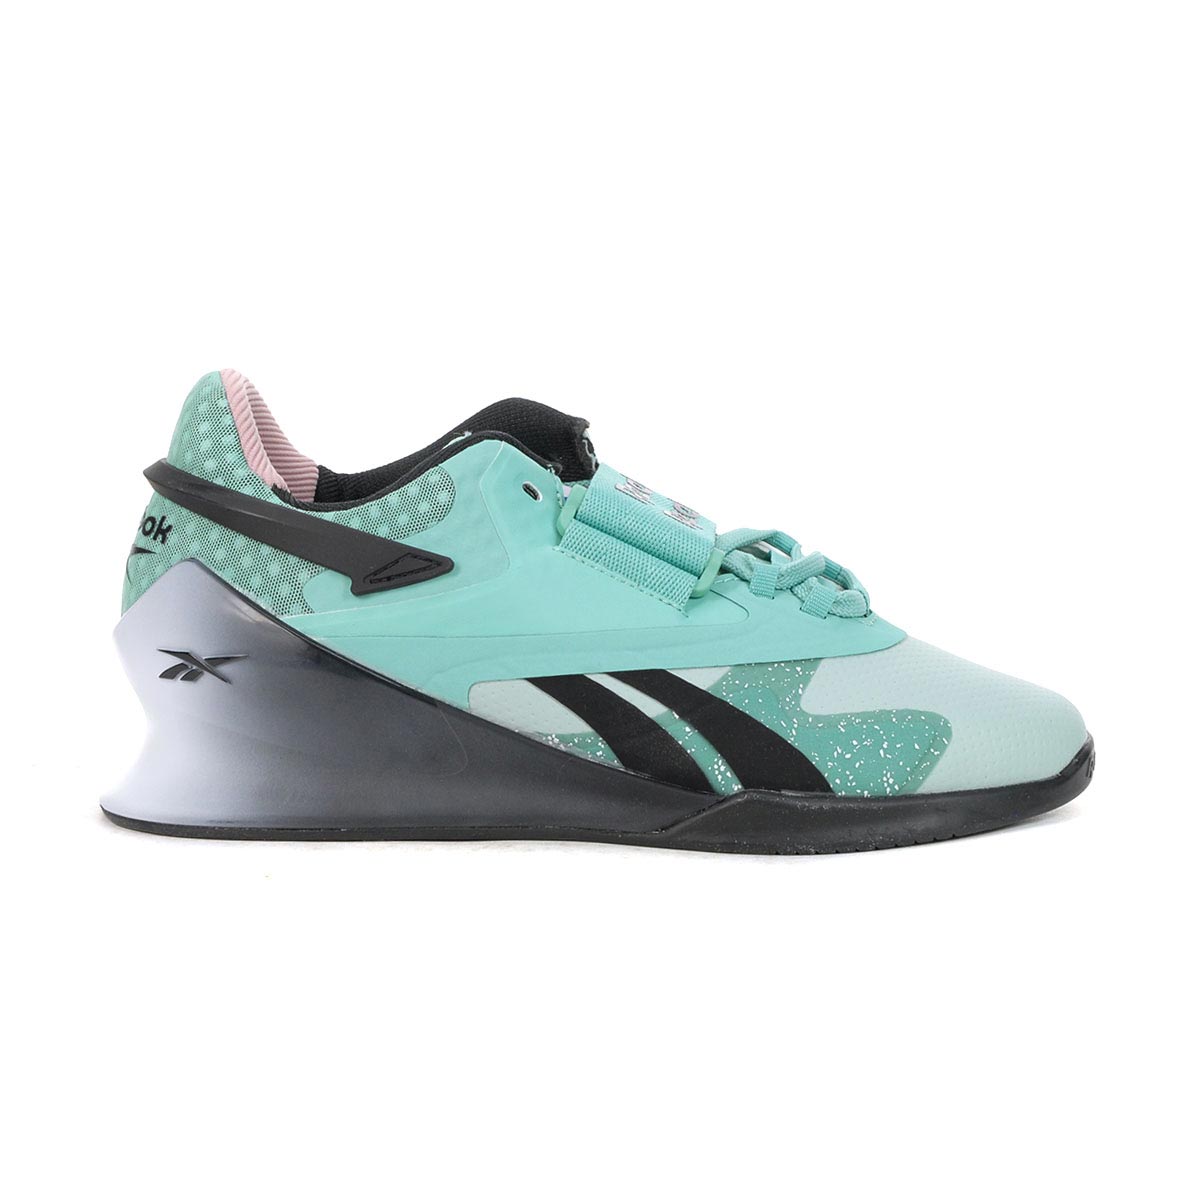 Reebok Women's Legacy Lifter II Teal/Grey/White Weightlifting Shoes ...